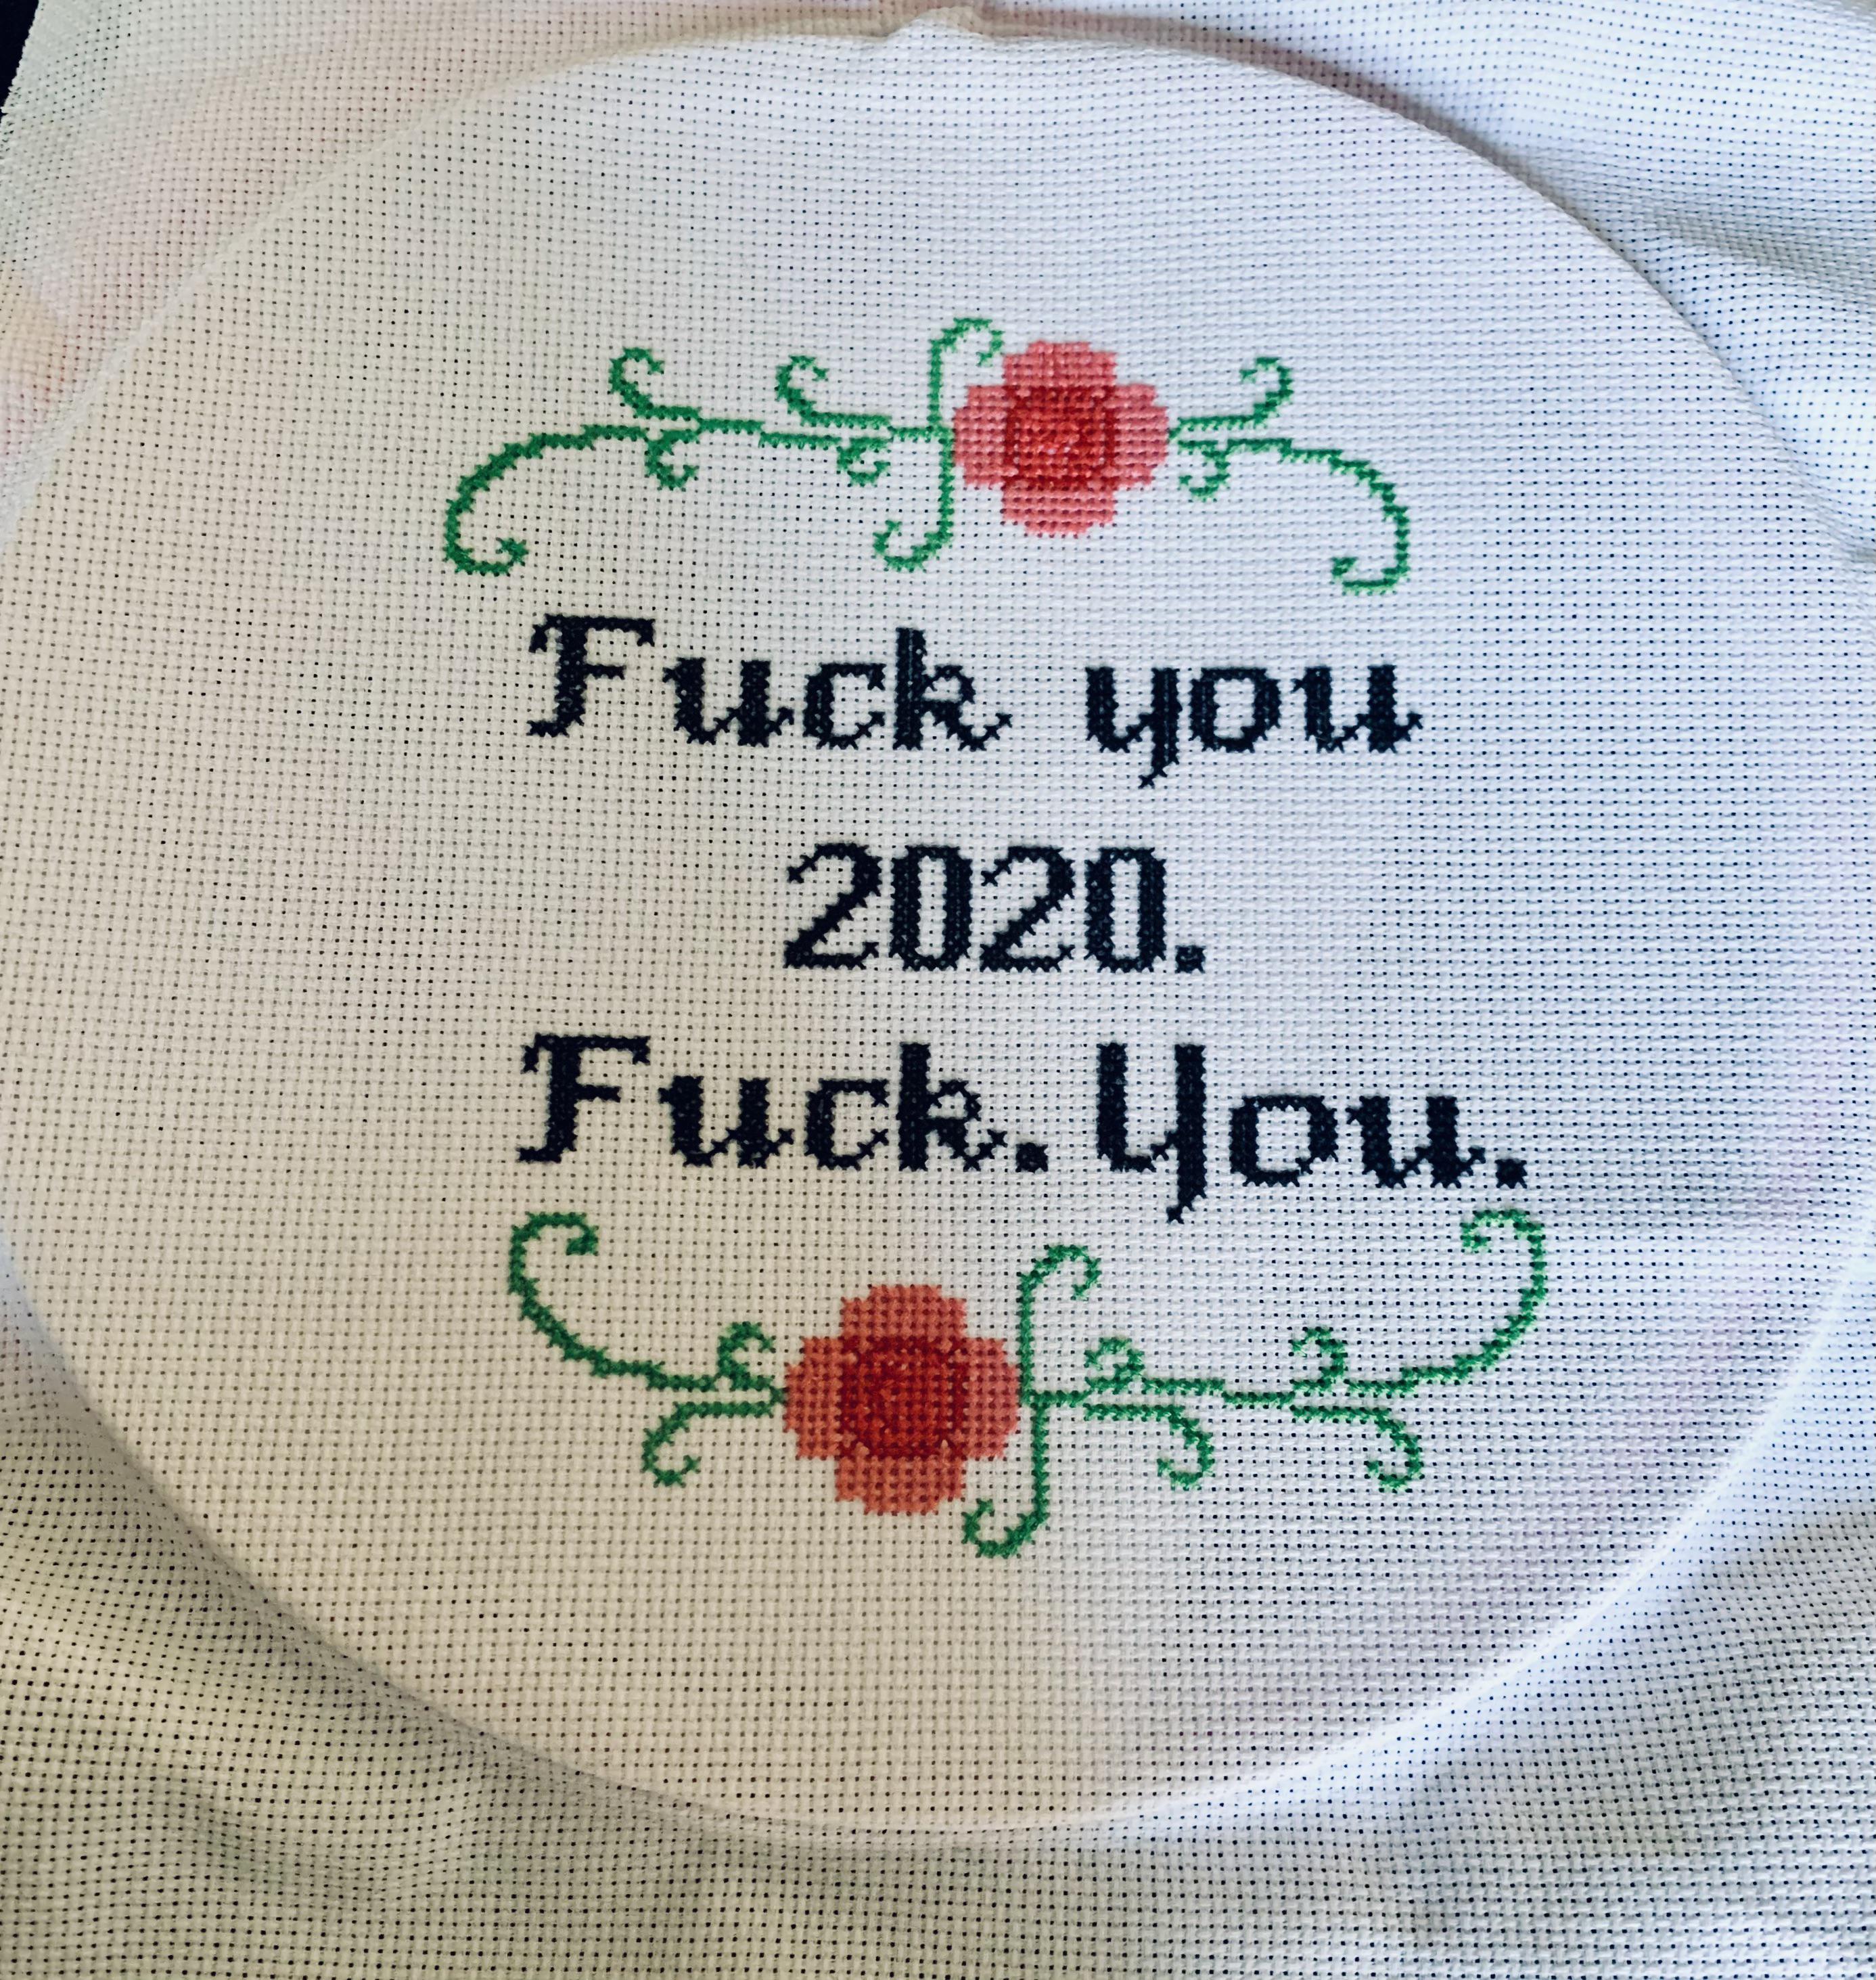 Teaching ya self how to cross stitch during the pandemic... for fun and profit.